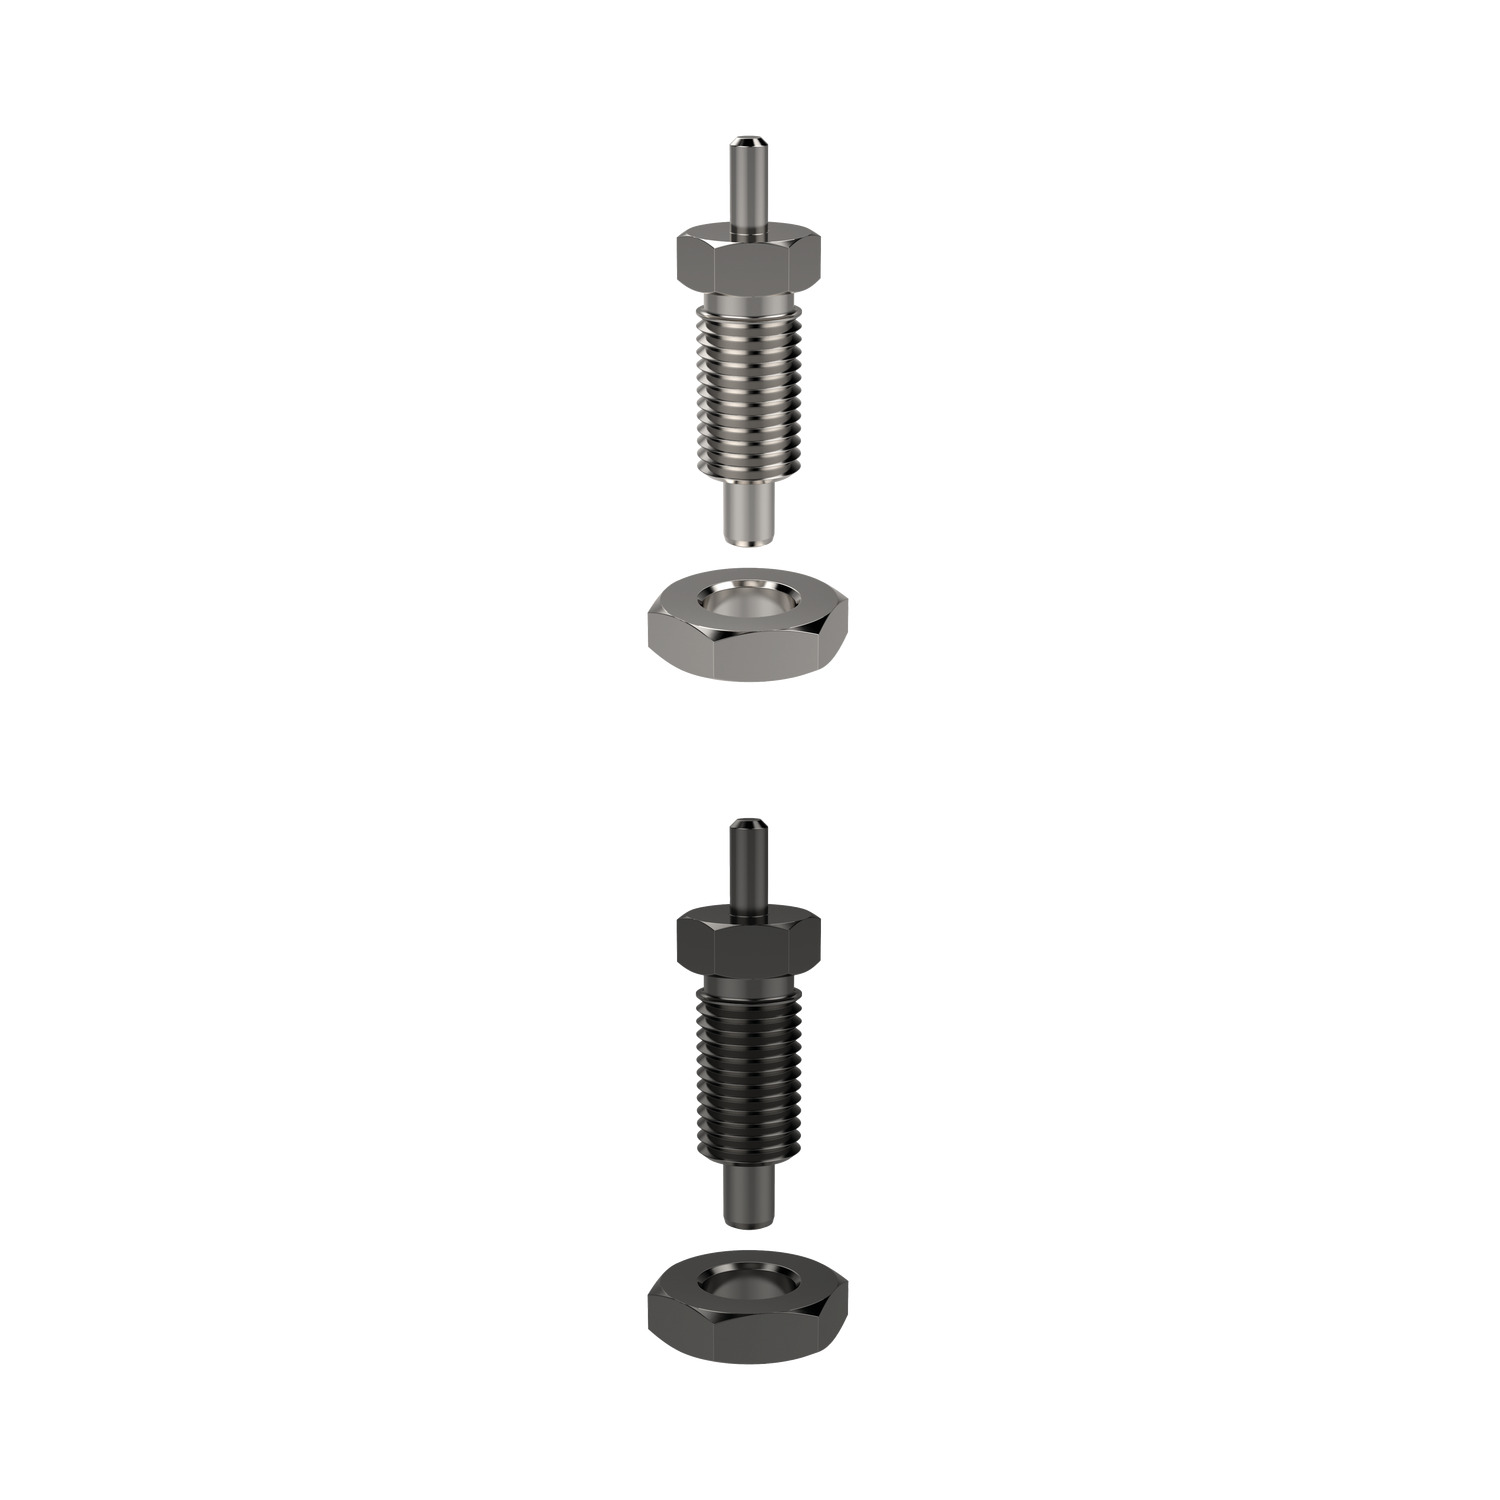 32681.W0255 Index Plungers - without knob - s/s Stainless Steel - Without Grip - 10 - M16 x1,5